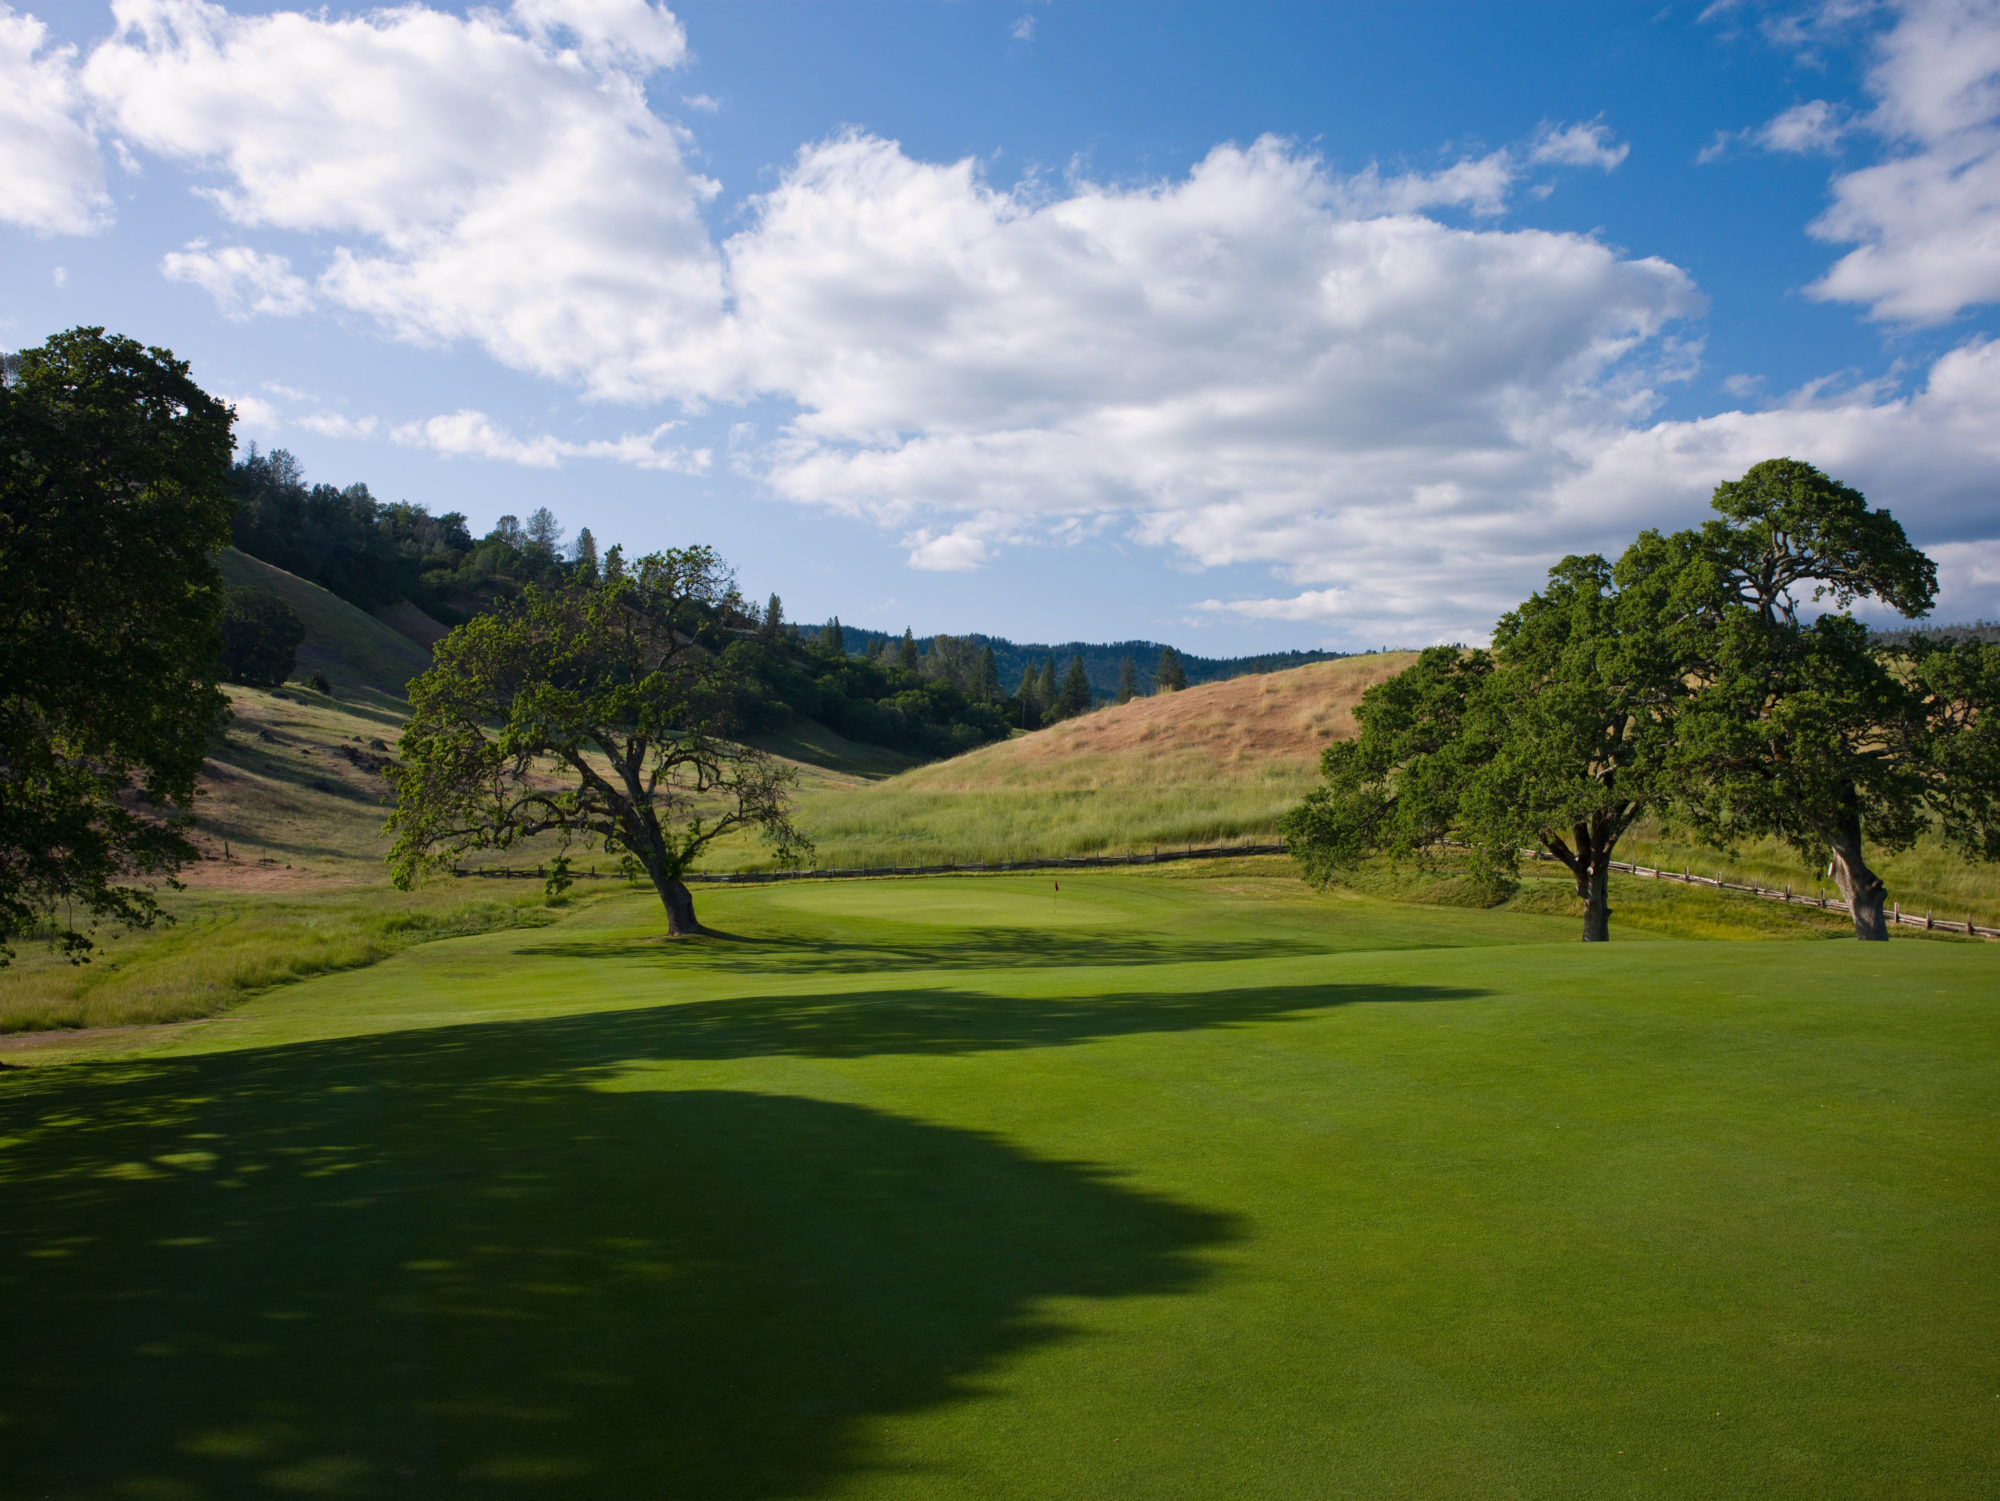 Both tee shot and approach at the par-4 6th had to thread the needle between magnificent oak trees.